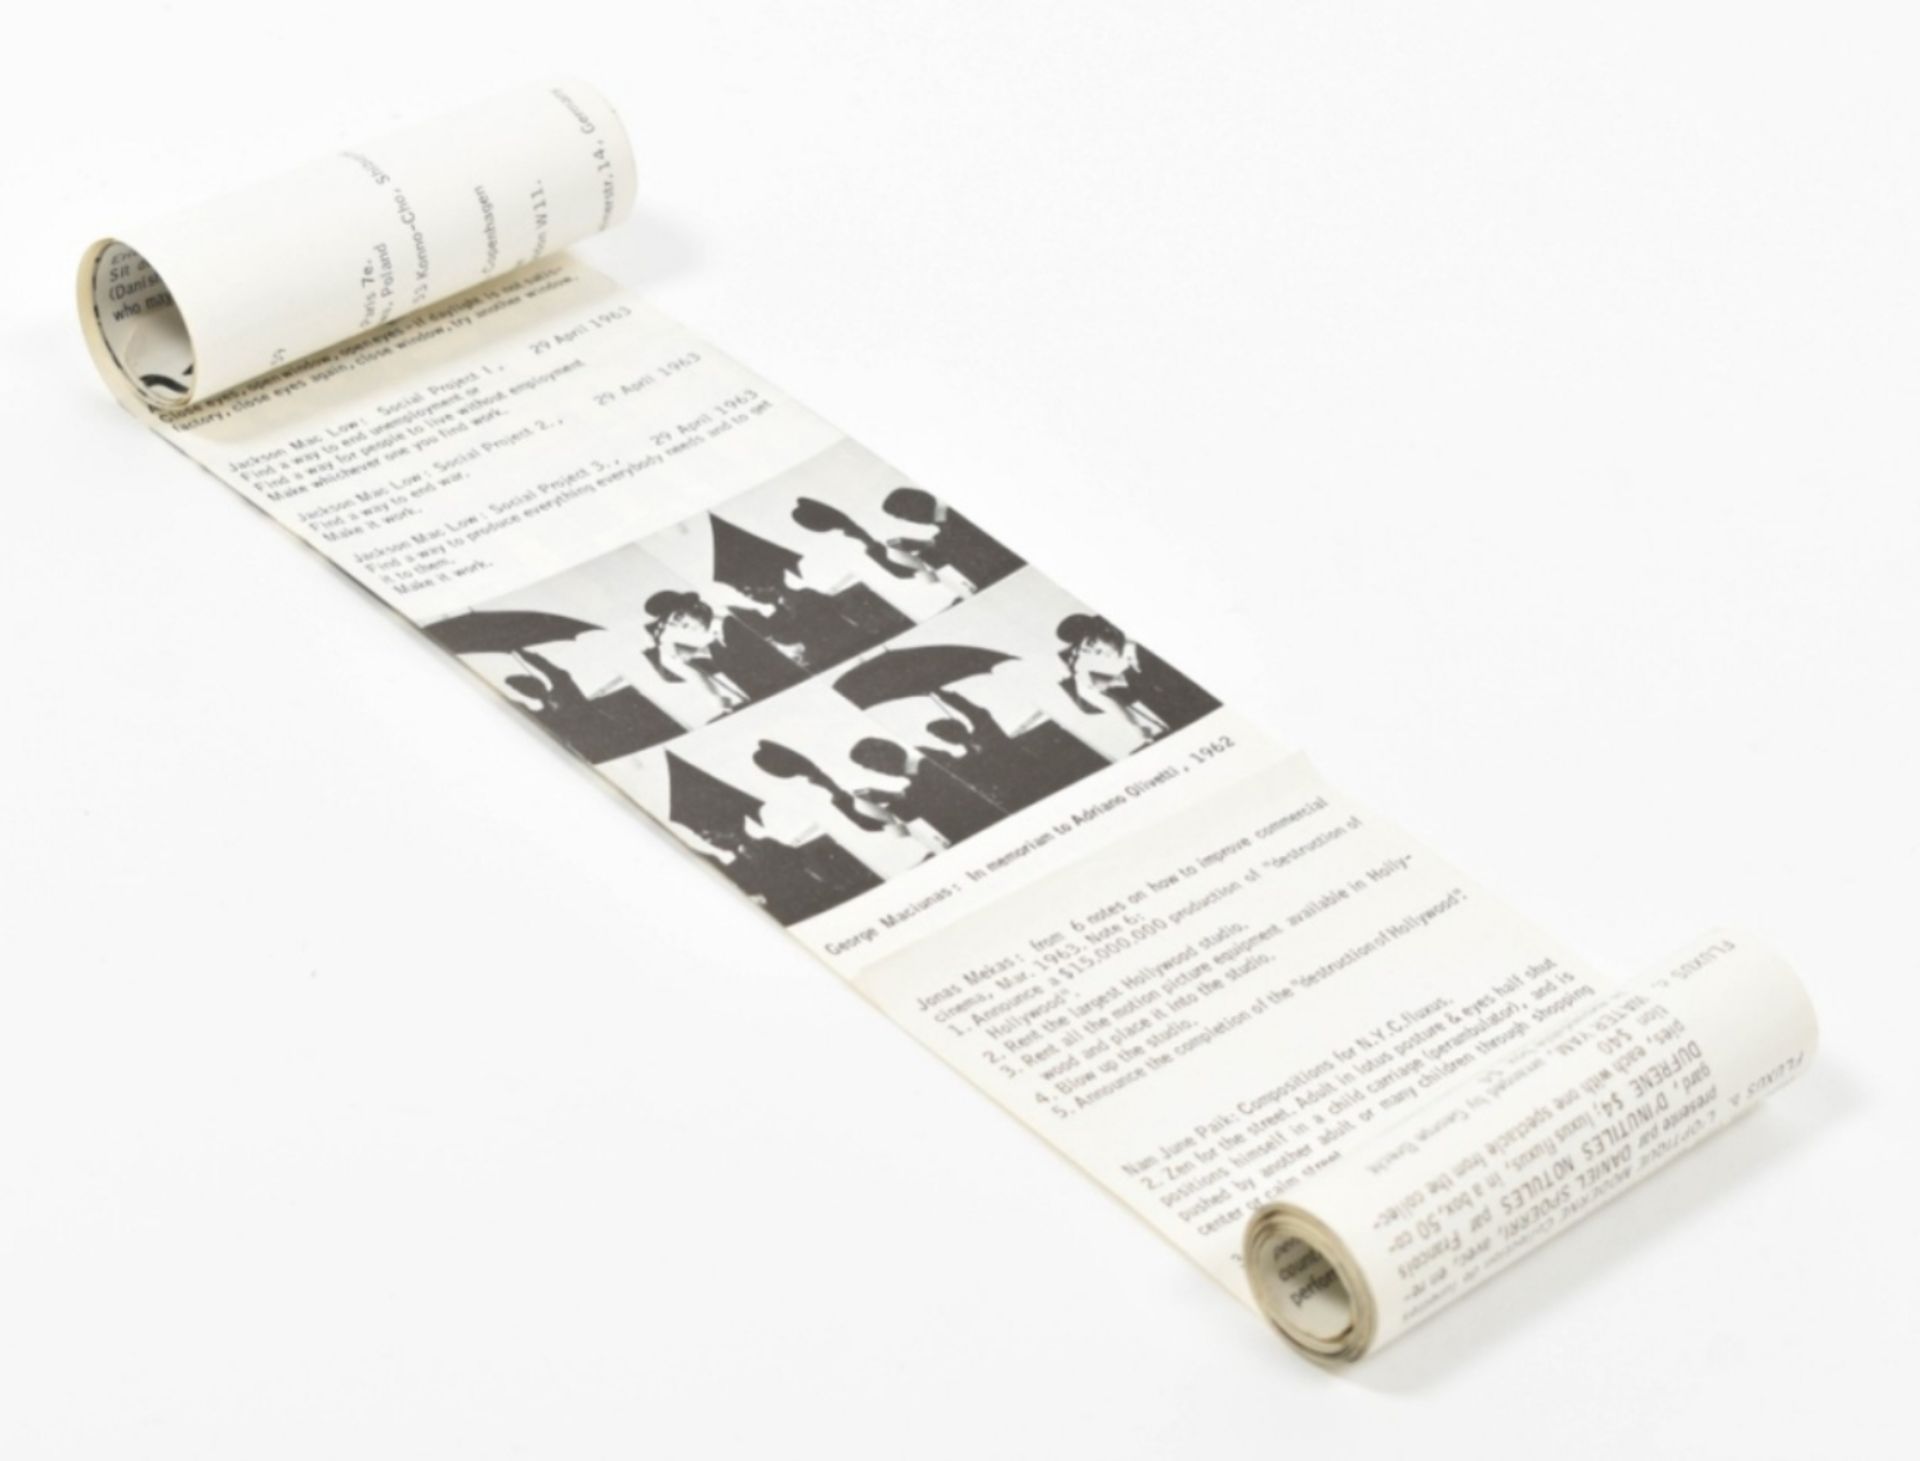 Fluxus Preview Review, 1963